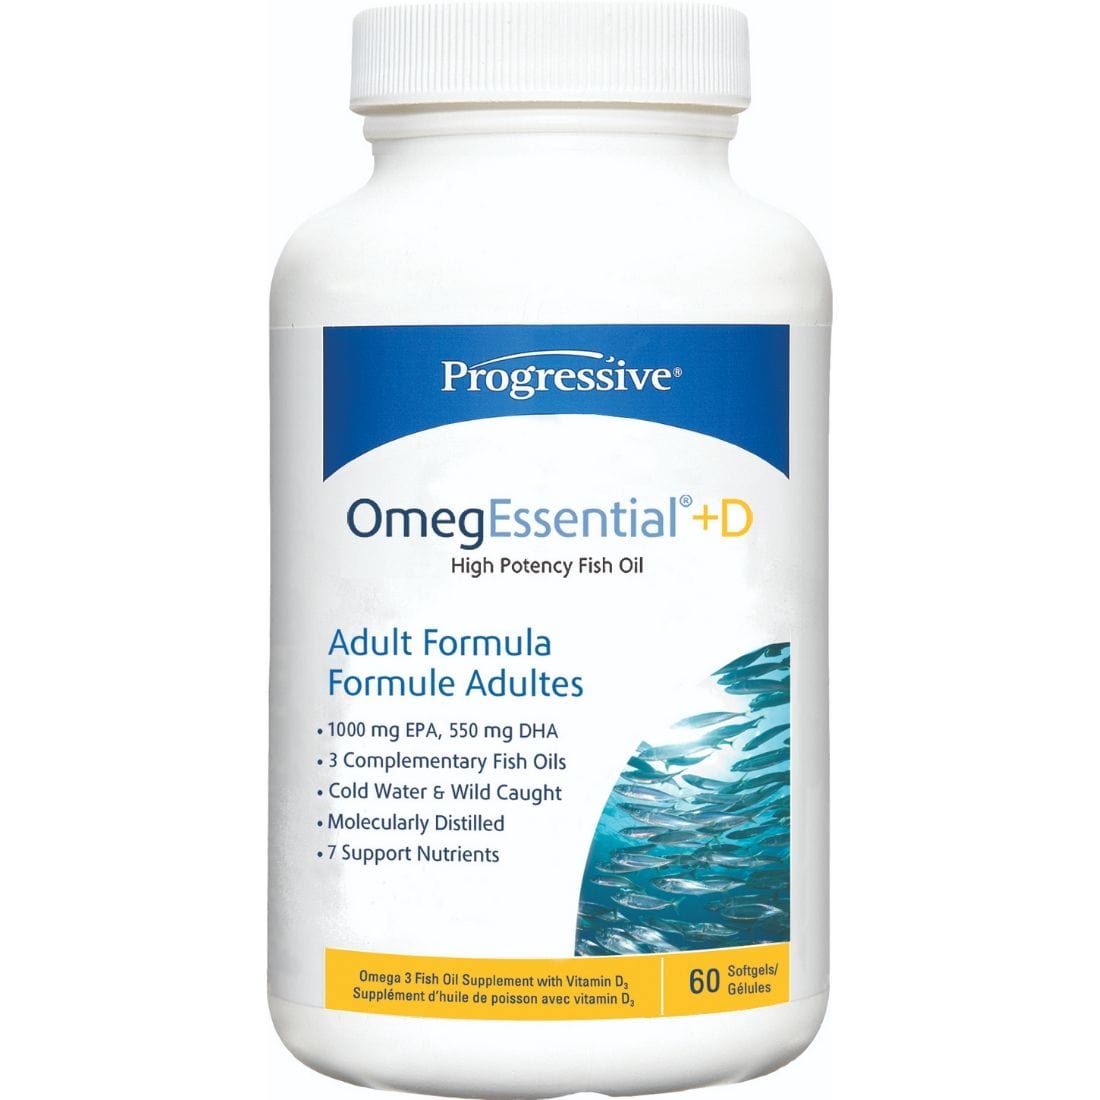 Progressive OmegEssential + D, High Potency Fish Oil